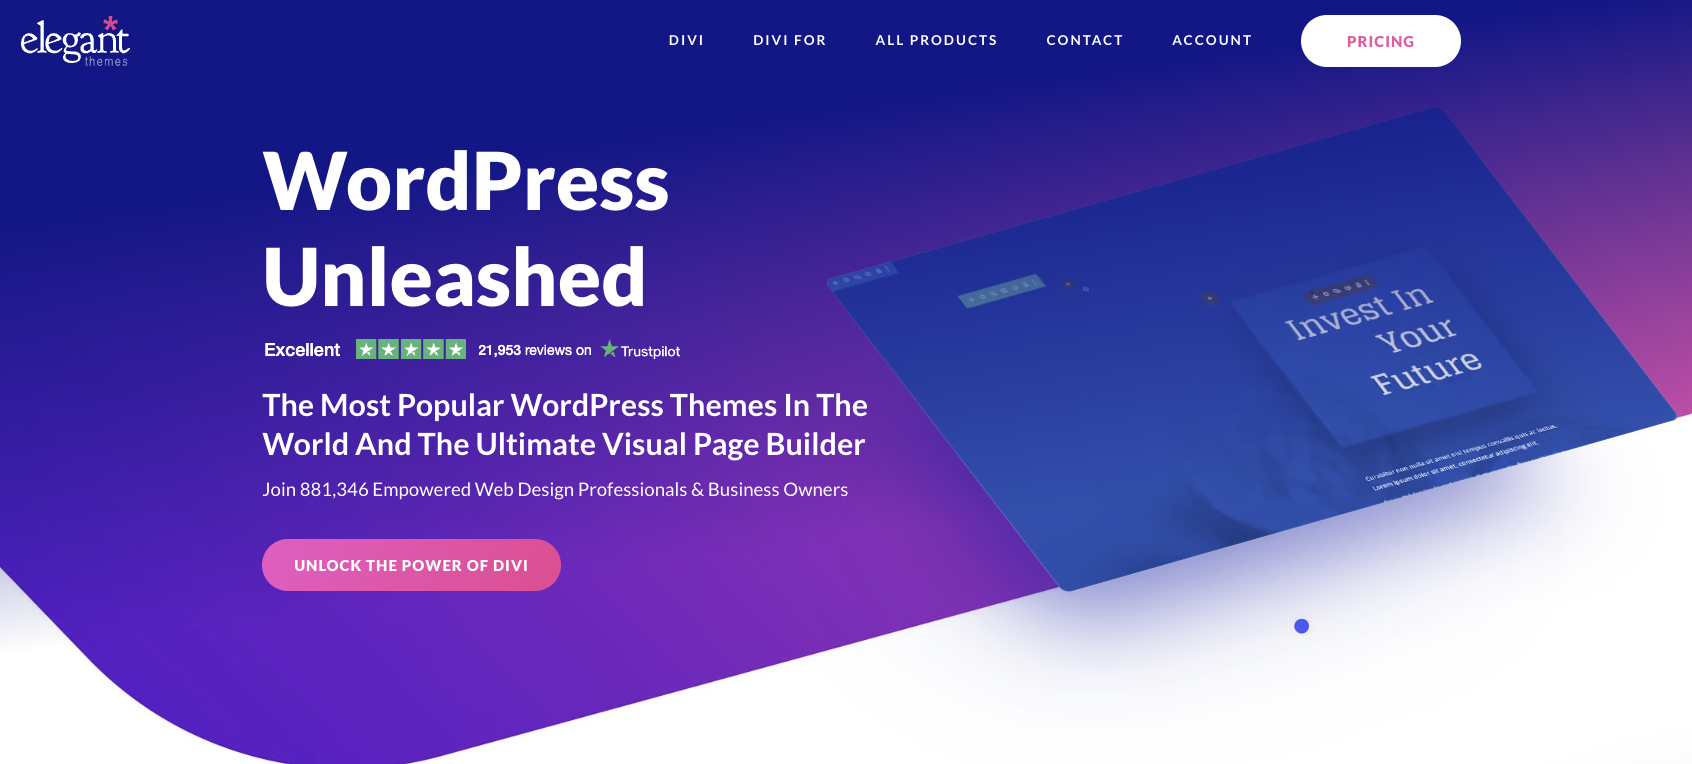 Divi - ultimate WordPress theme and visual page builder